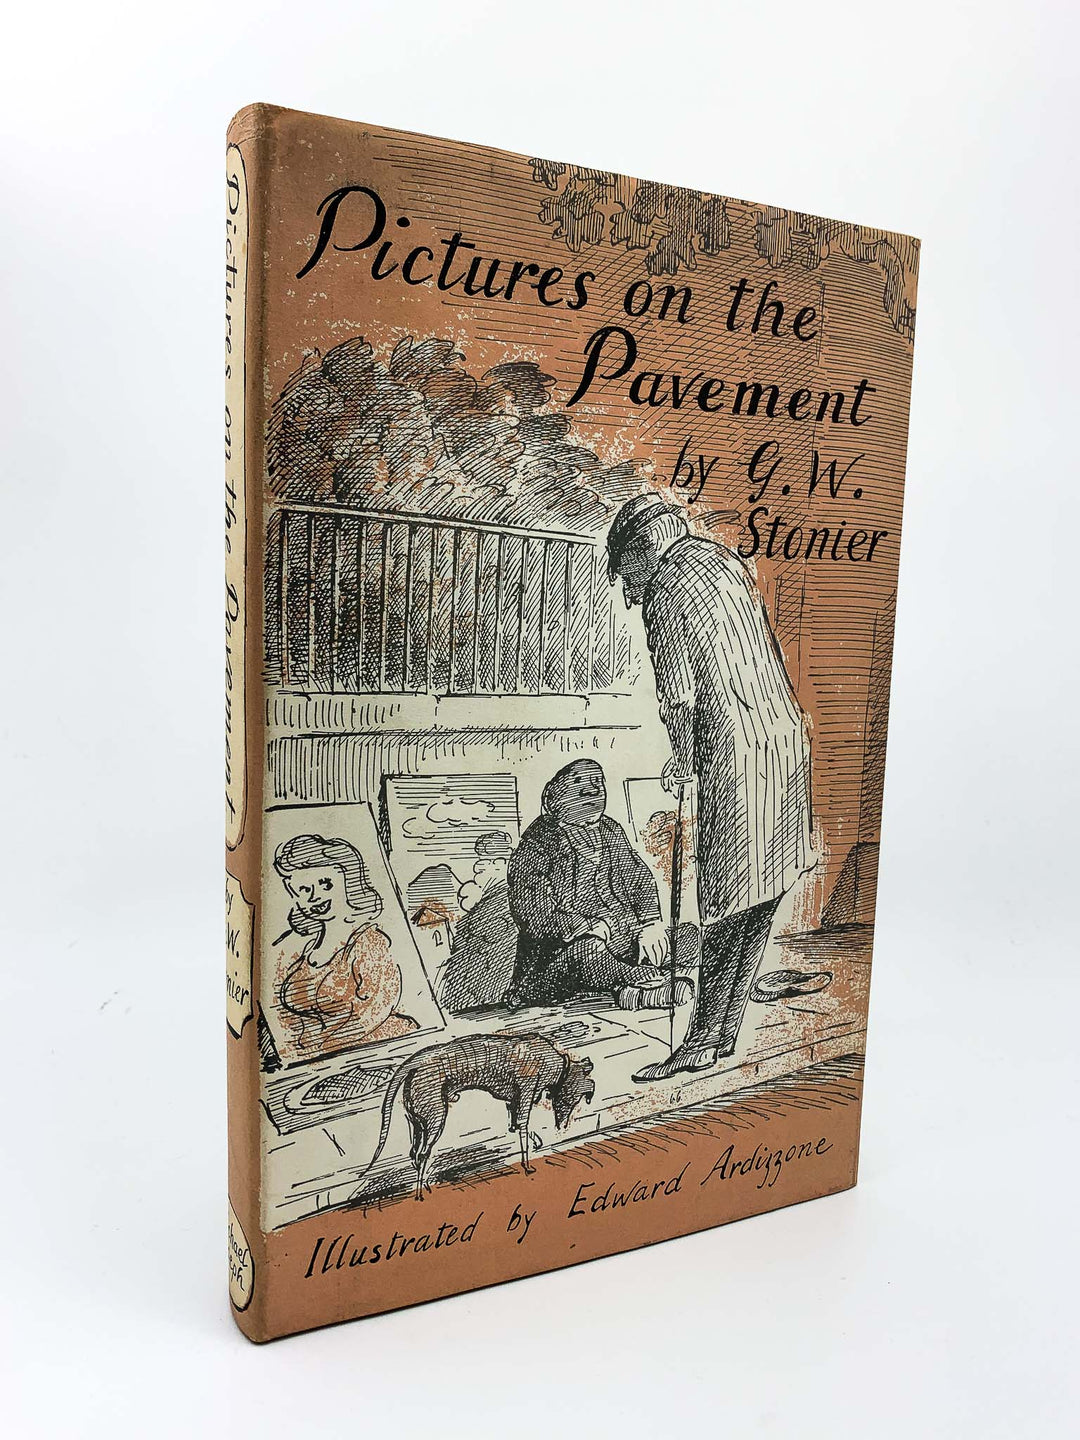 Stonier, G.W. - Pictures on the Pavement | front cover